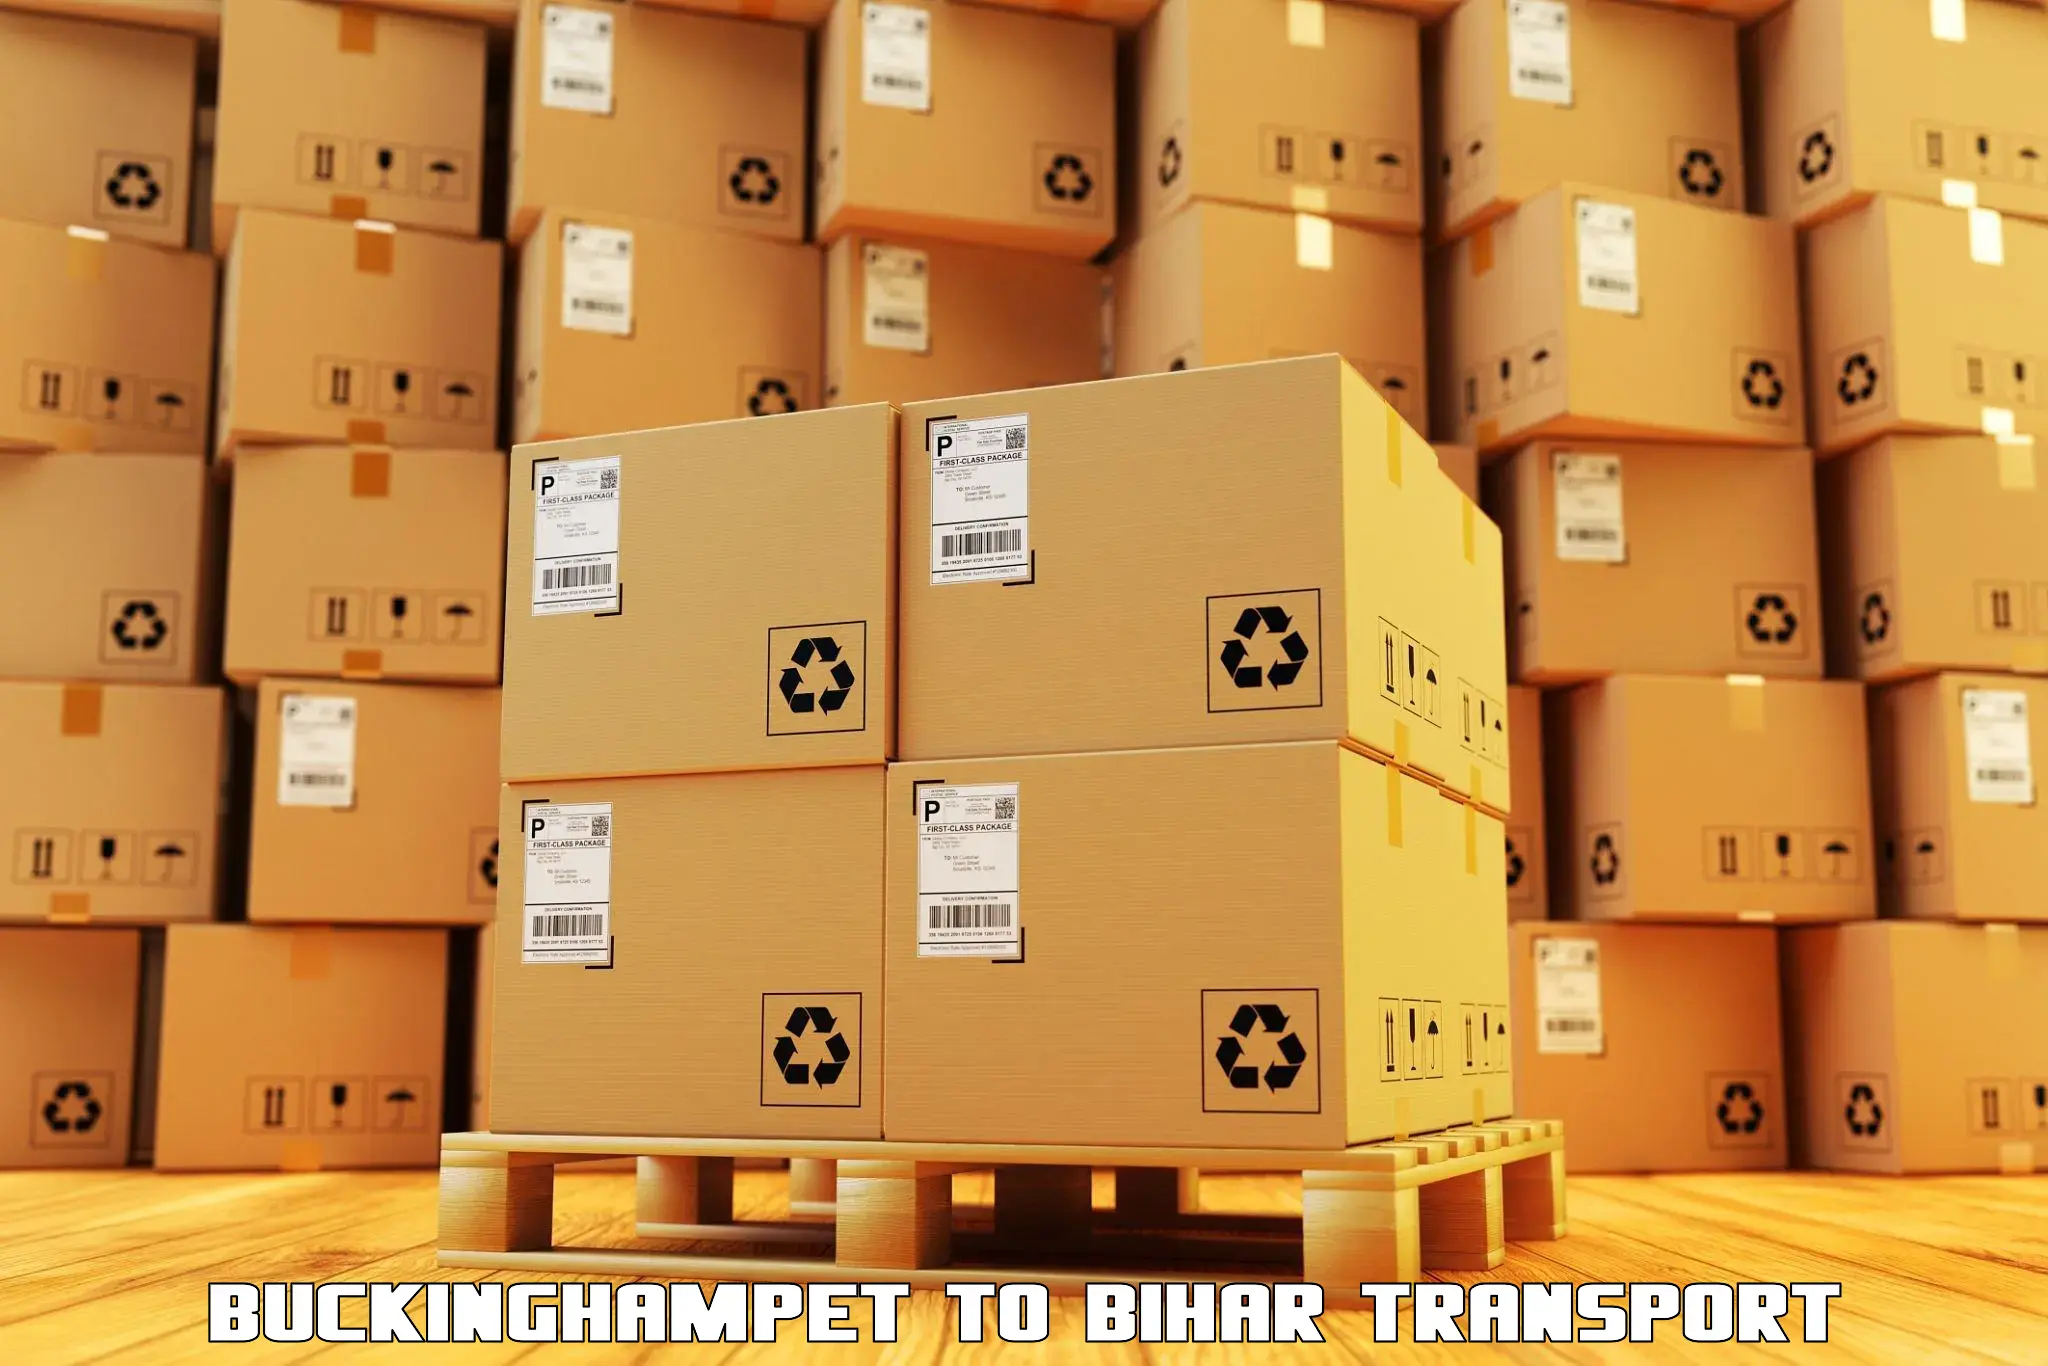 Material transport services in Buckinghampet to Buxar